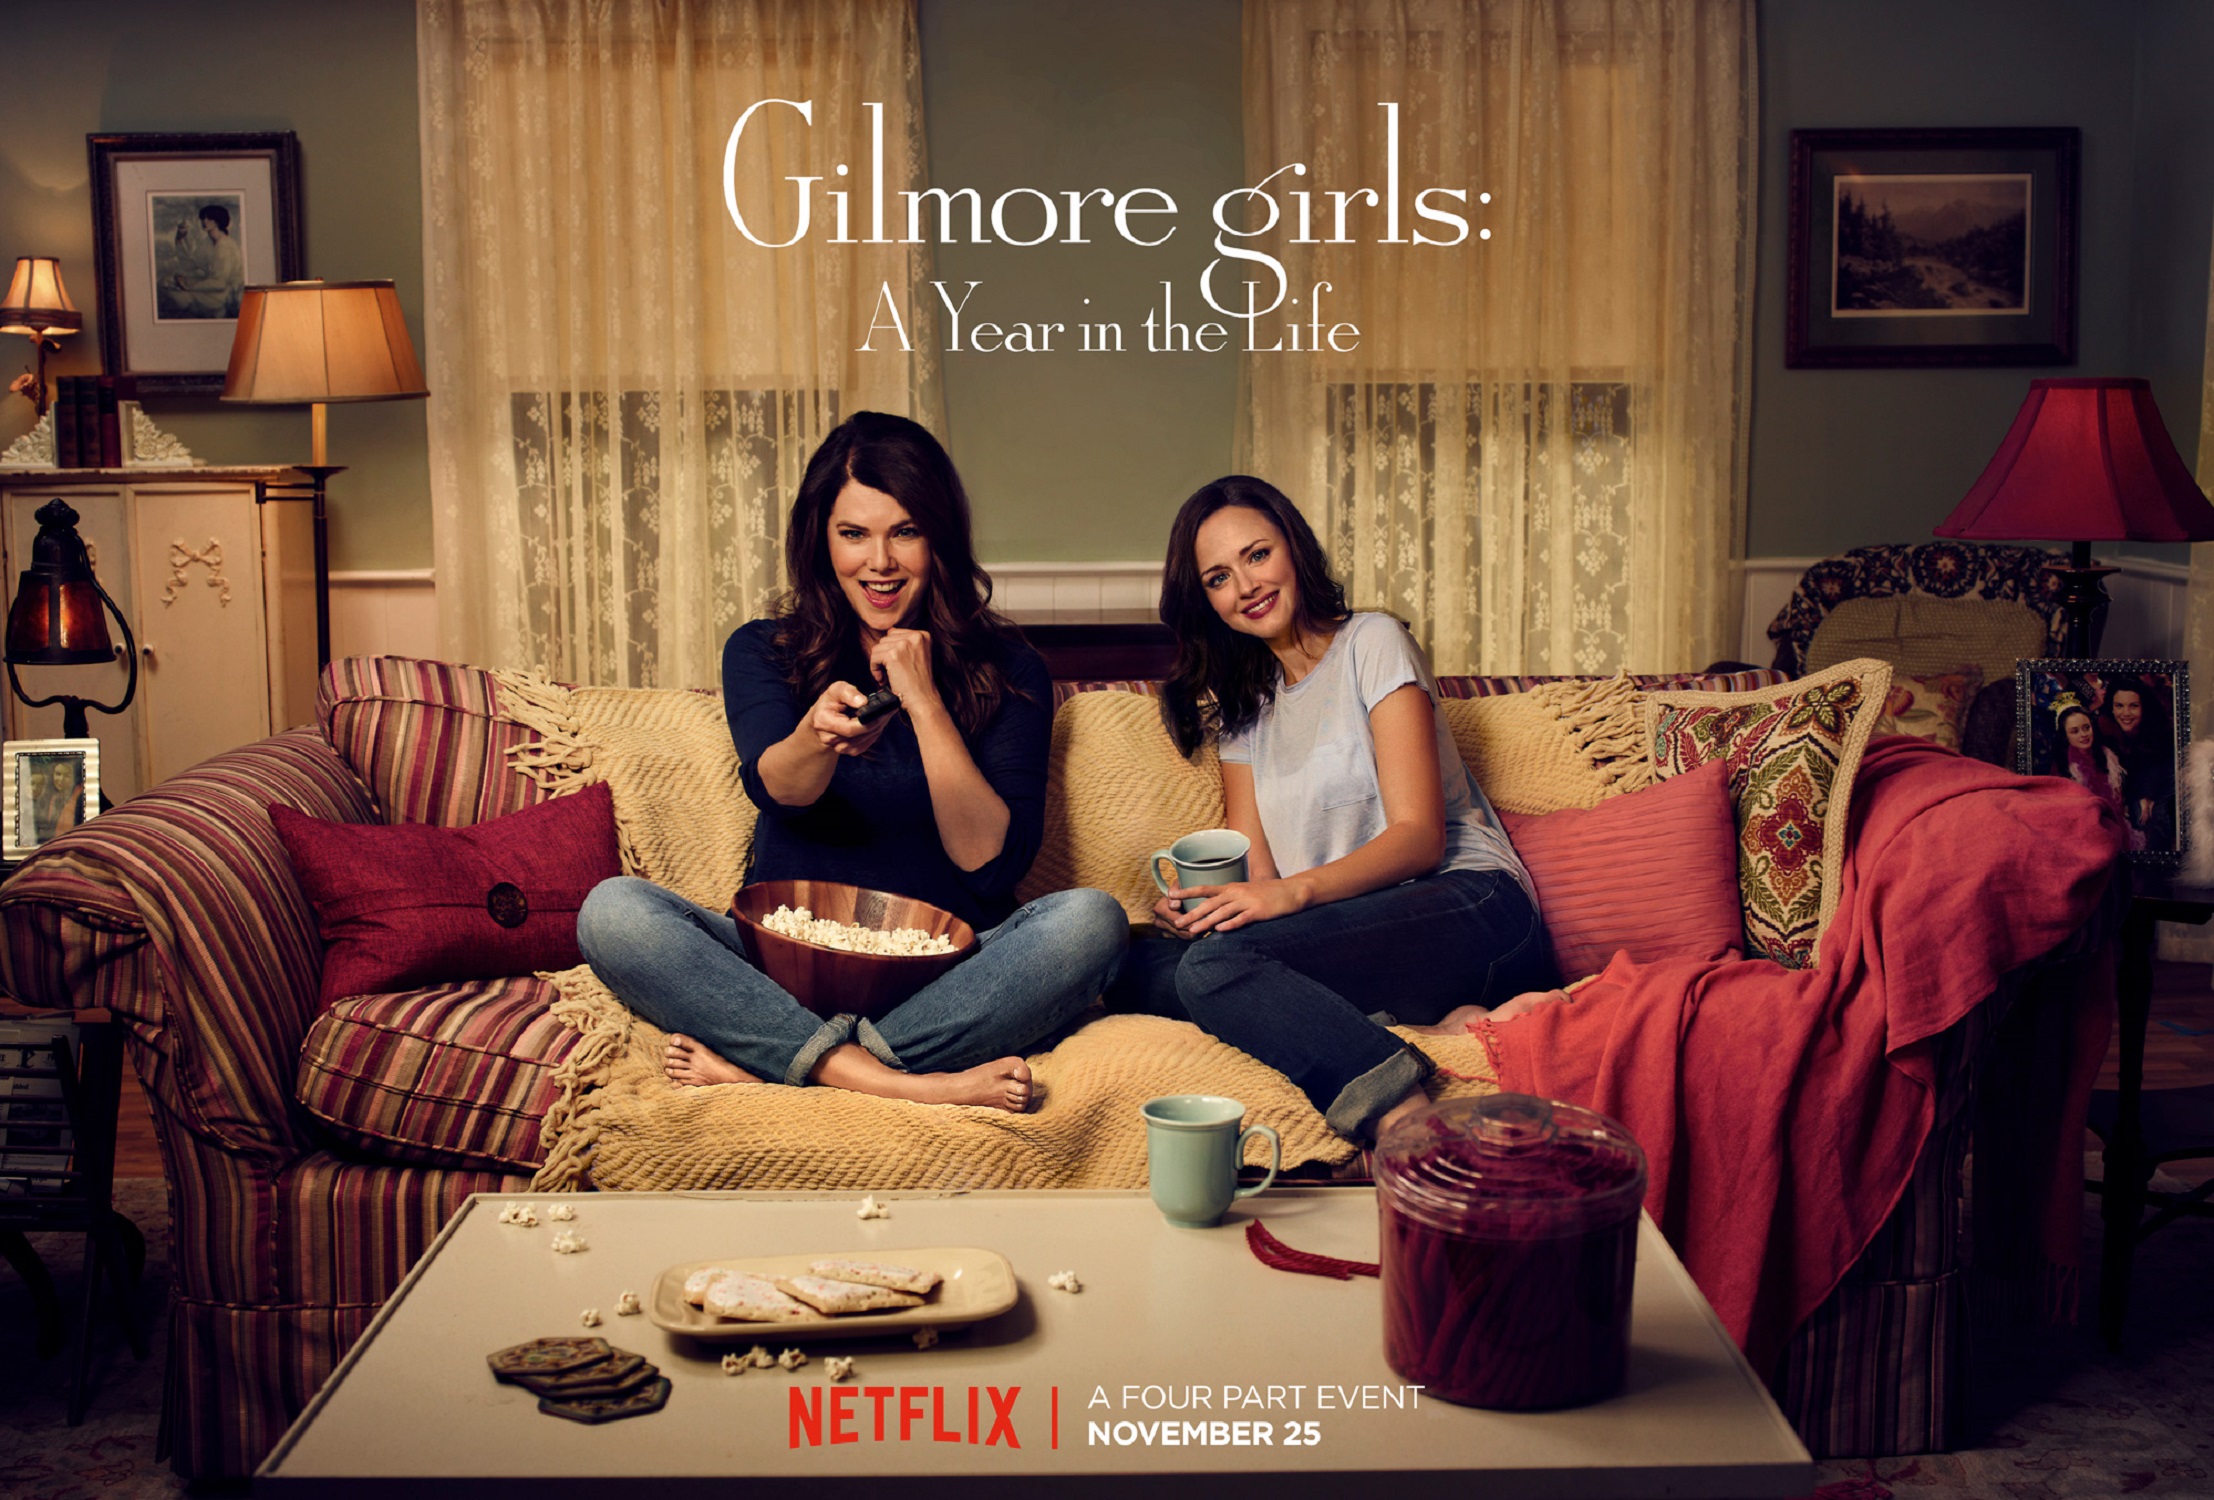 Lauren Graham as Lorelai Gilmore and Alexis Bledel as Rory Gilmore in 'Gilmore Girls: A Year in the Life'